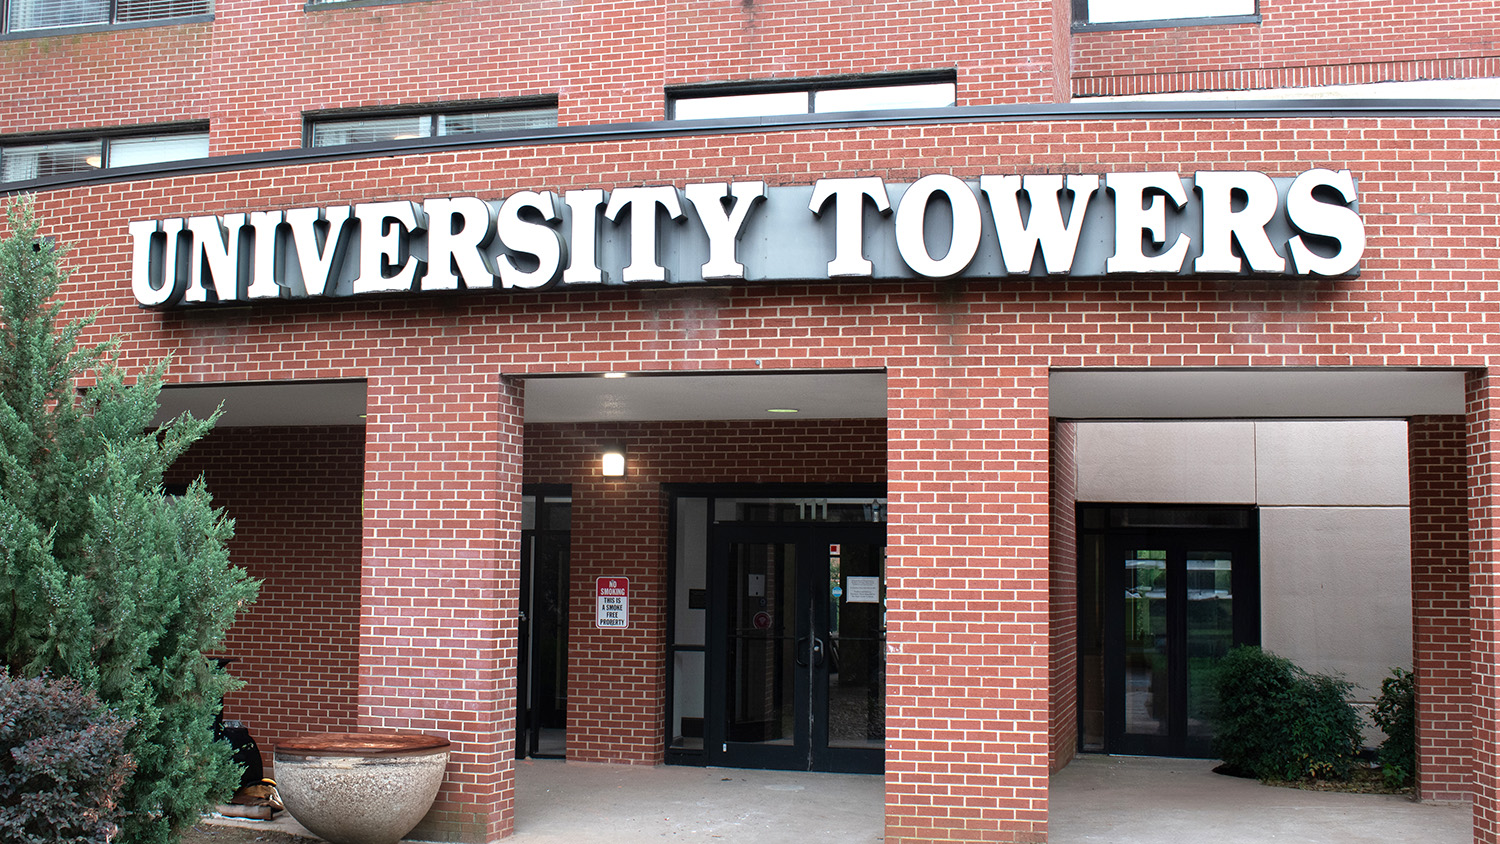 Starting this fall, a newly-renovated University Towers will be part of University Housing's options for first-year students to live on campus.